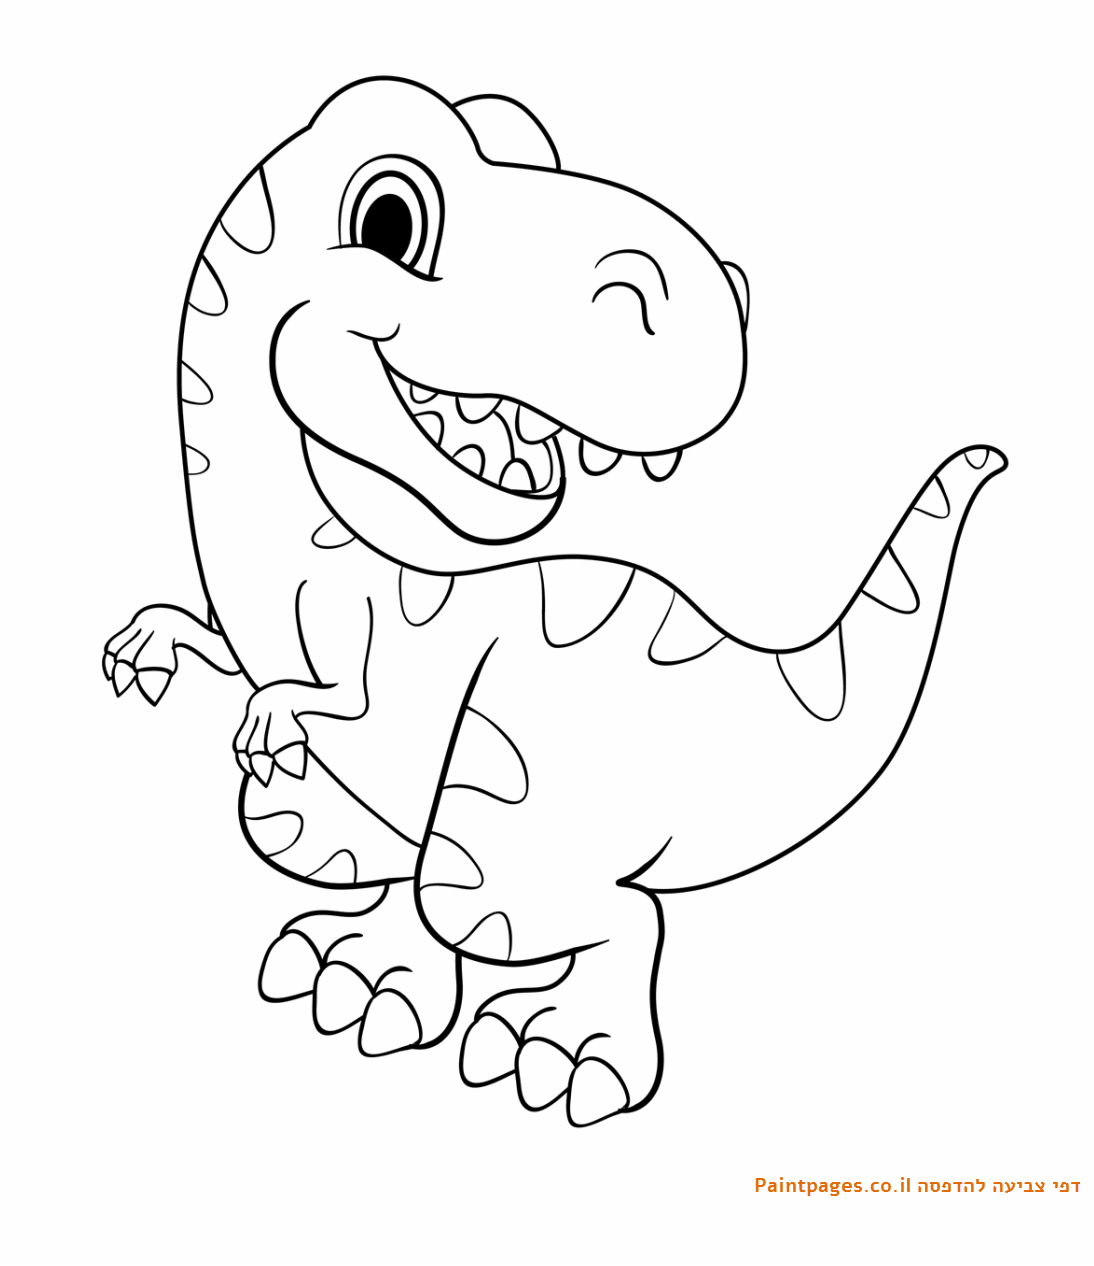 dinosaur colouring page baby dinosaur coloring pages to download and print for free colouring page dinosaur 